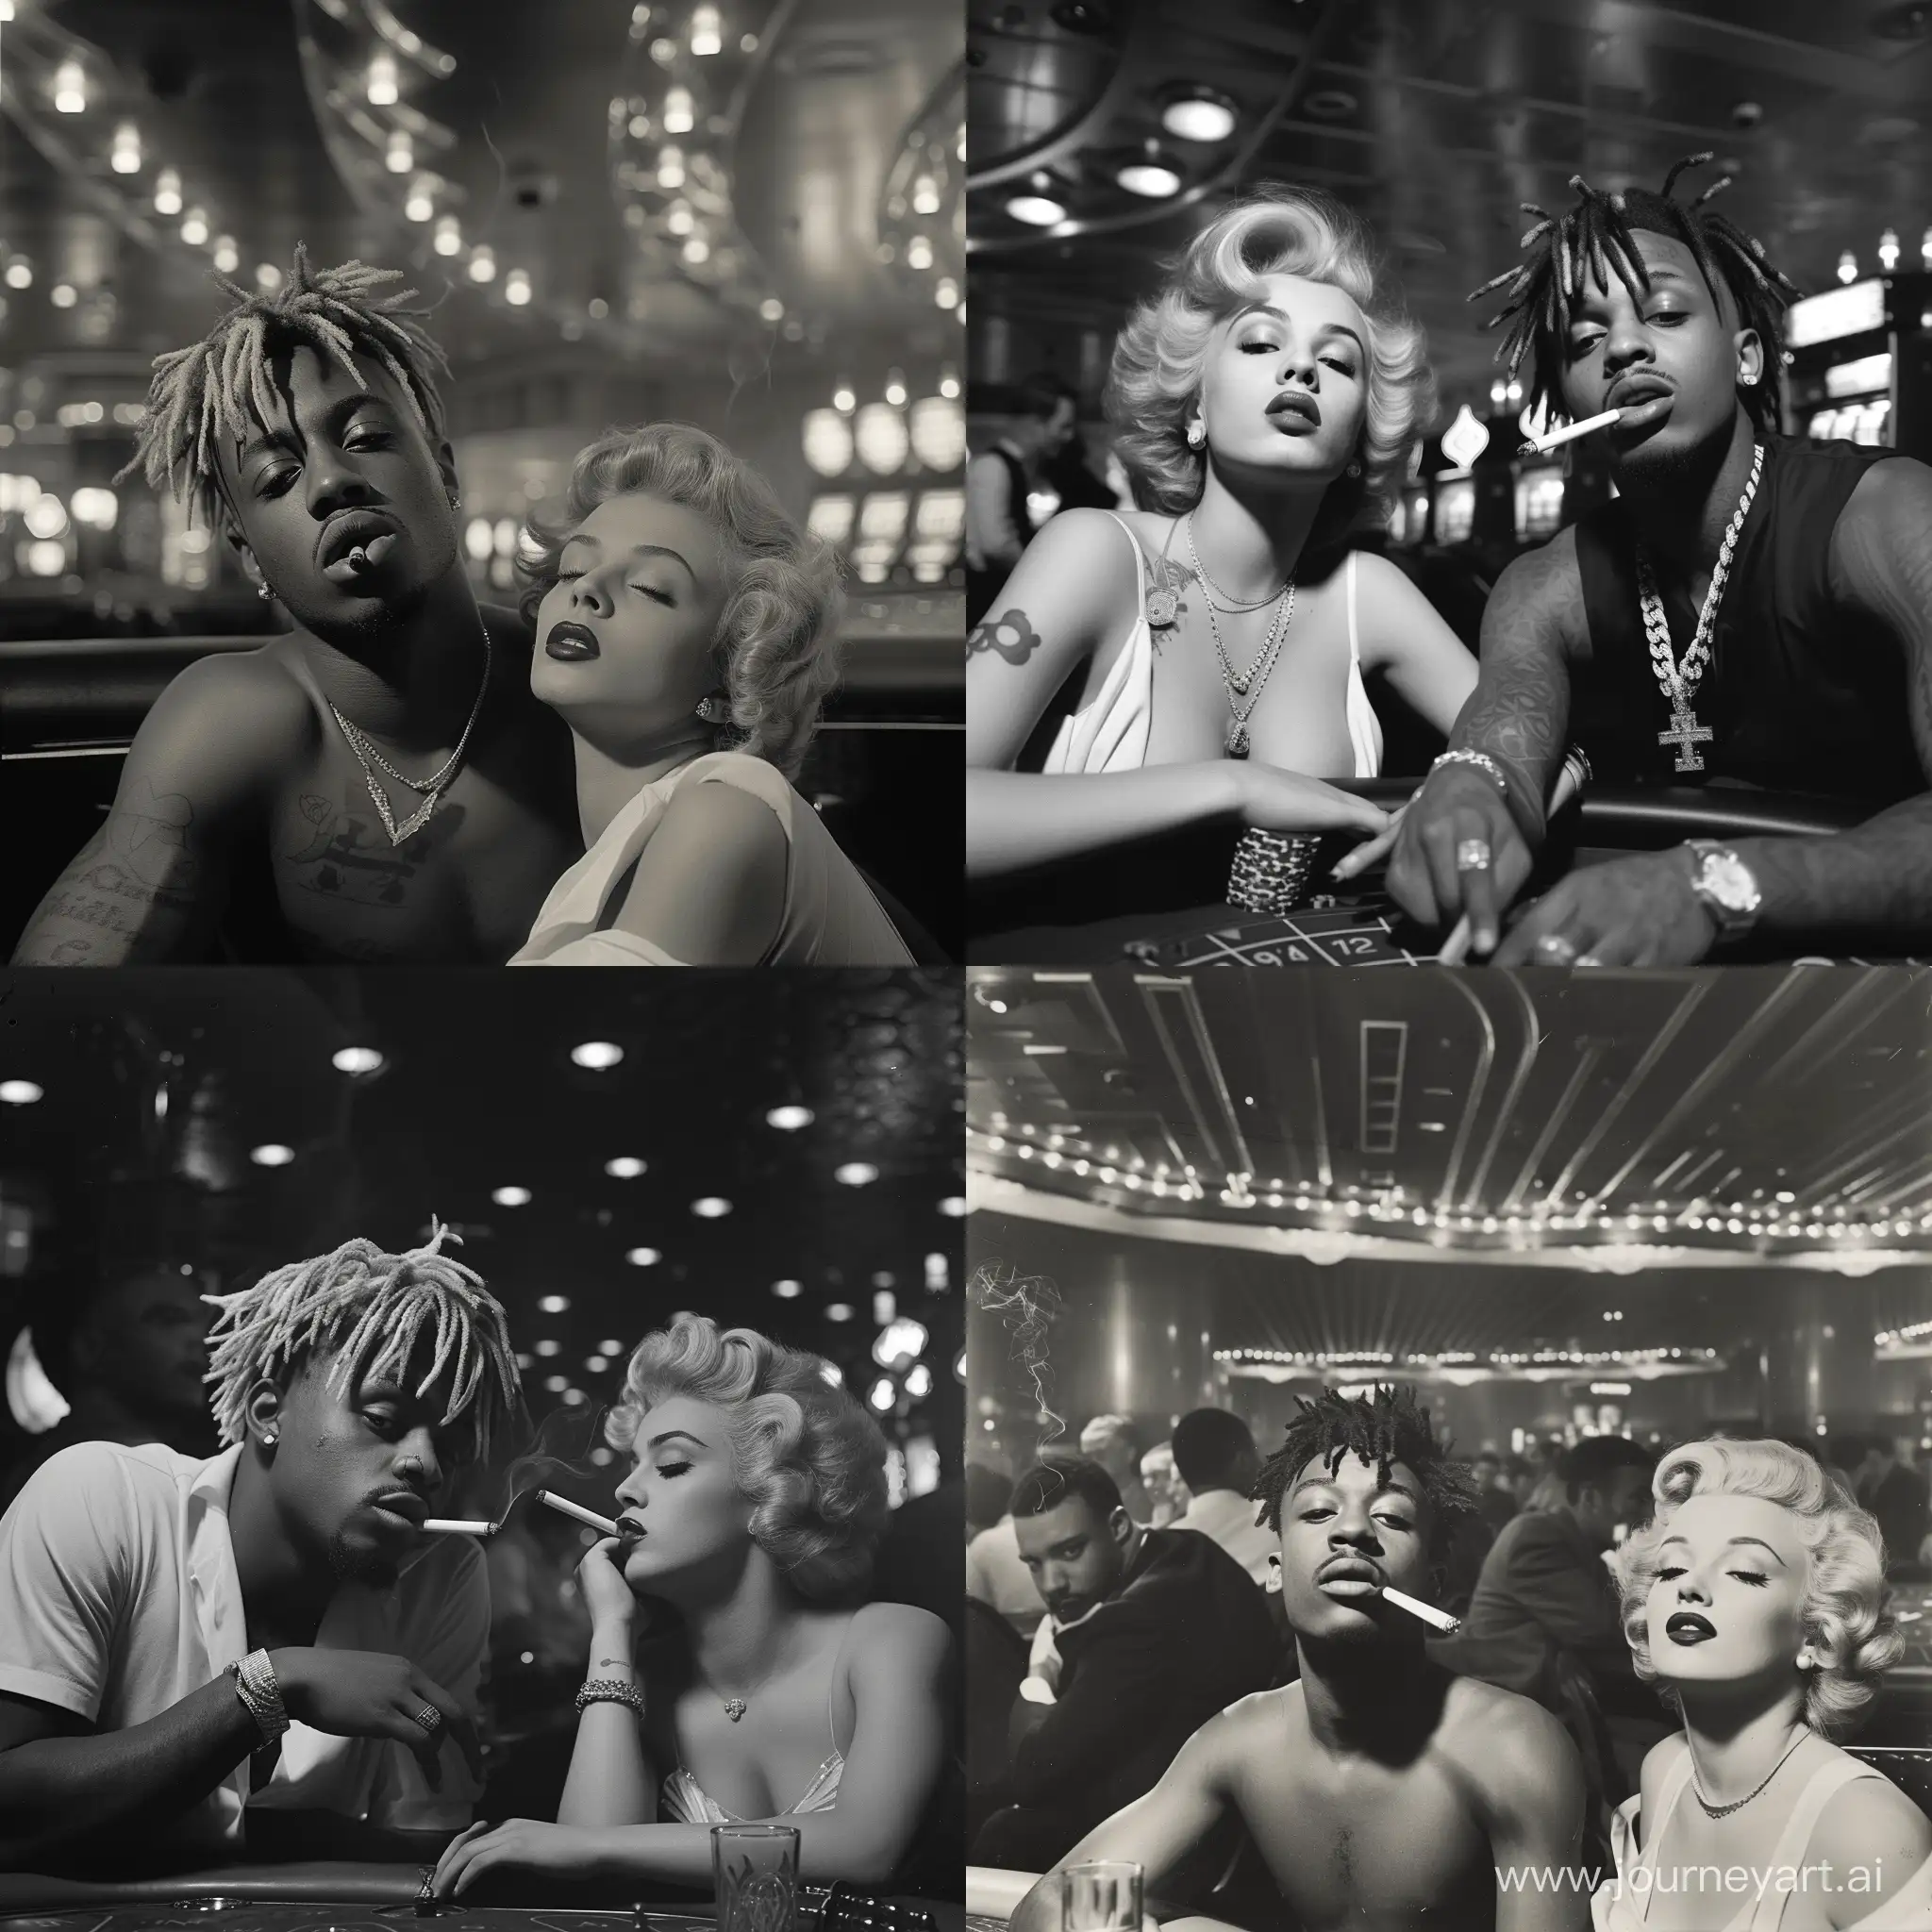 A 1950s Black and White Photograph,of Juice WRLD,in a Casino with Marilyn Monroe Smoking.